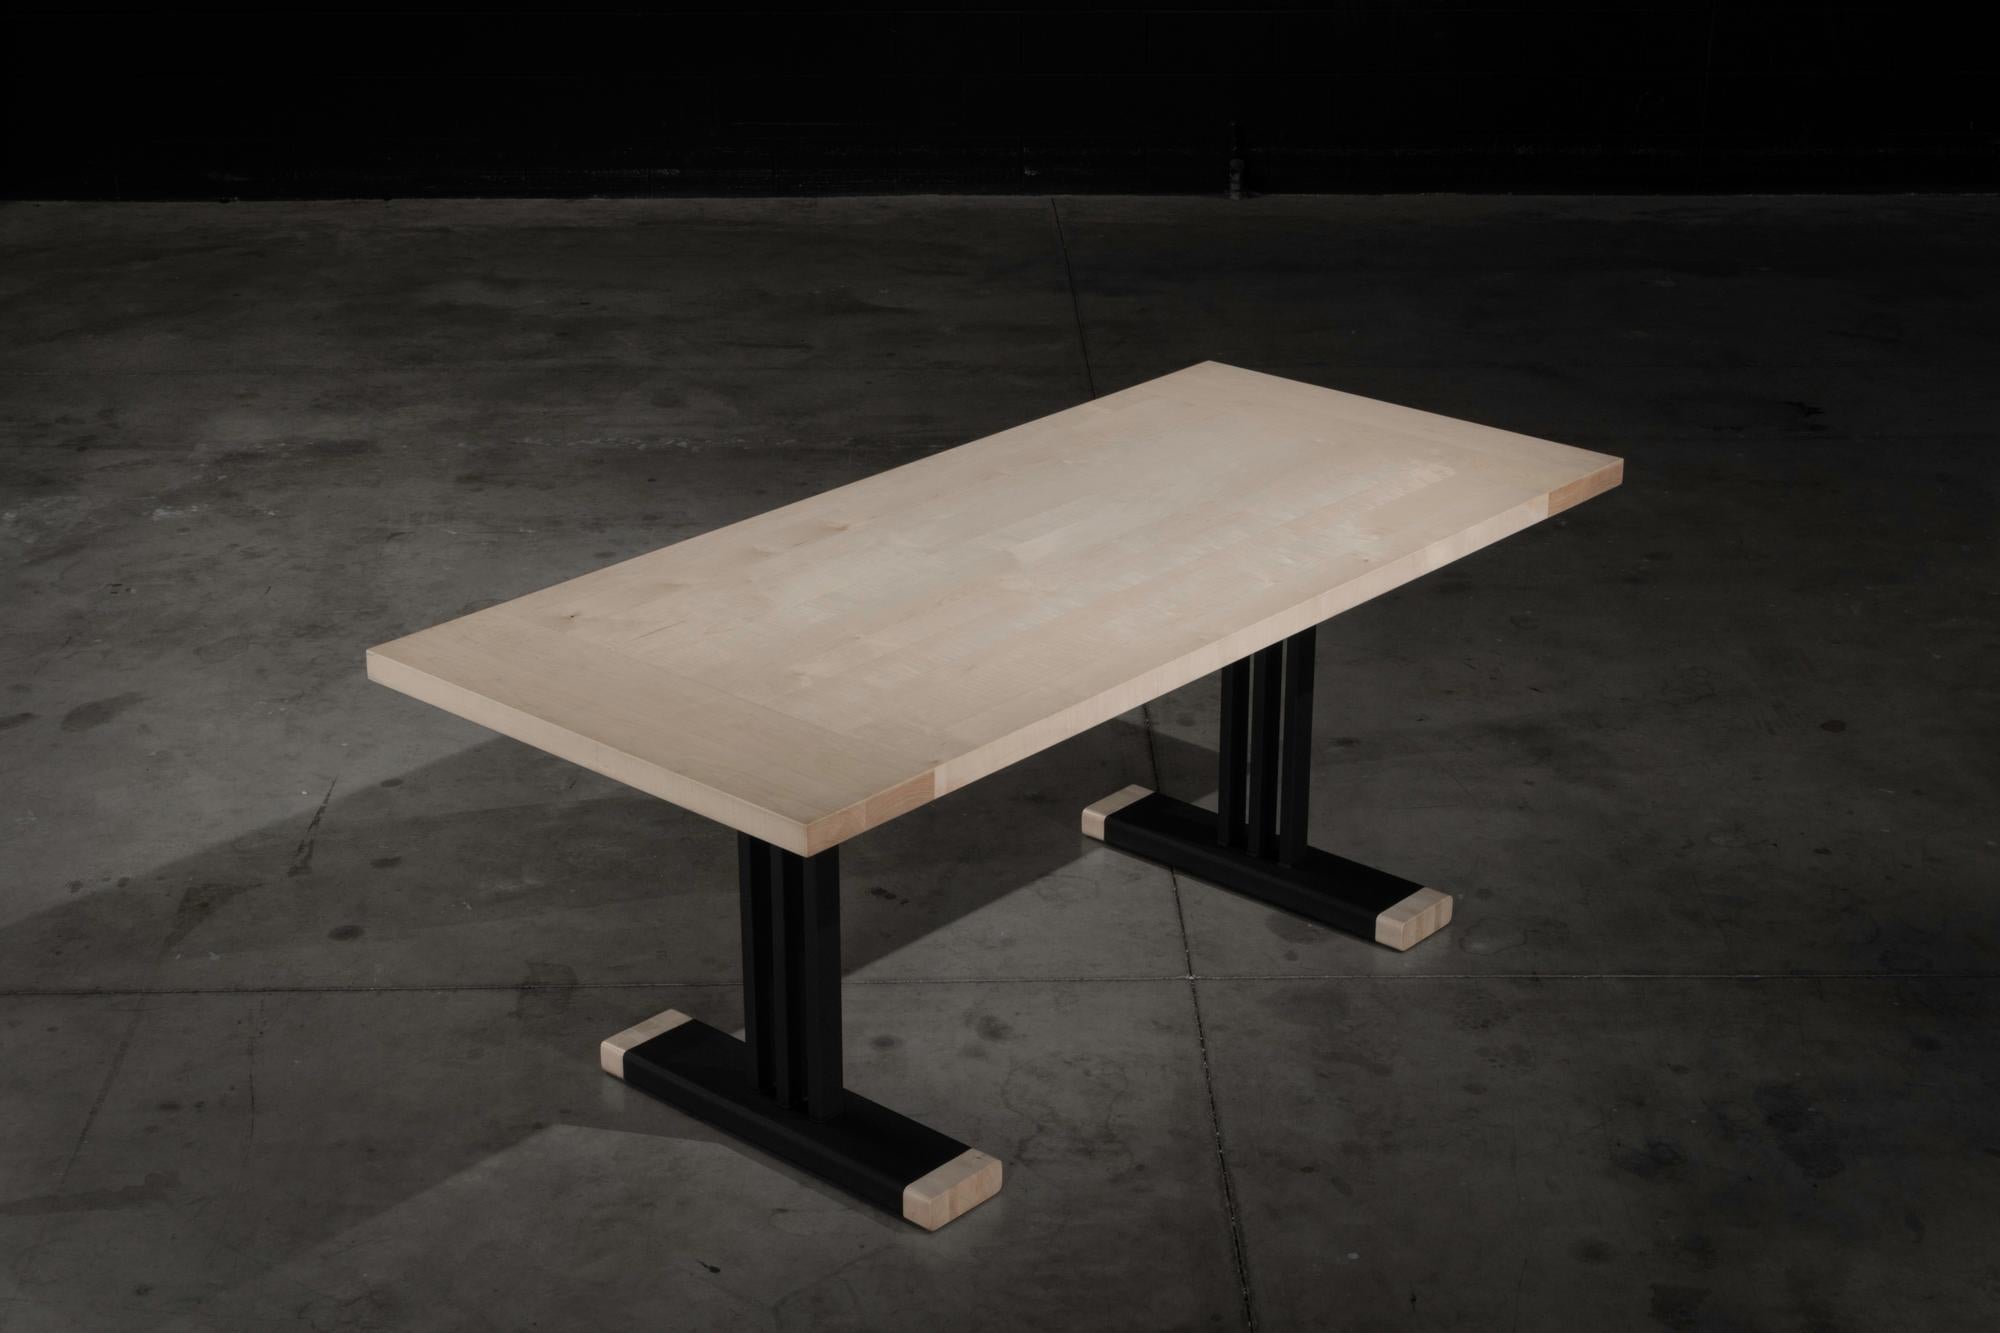 Made of a bleached hard maple top and a wrinkle black powder-coated base, the Trumbull dining table fits many modern spaces with its sleek design. Made of solid maple, the top of this table also encompasses a breadboard design to add style to the